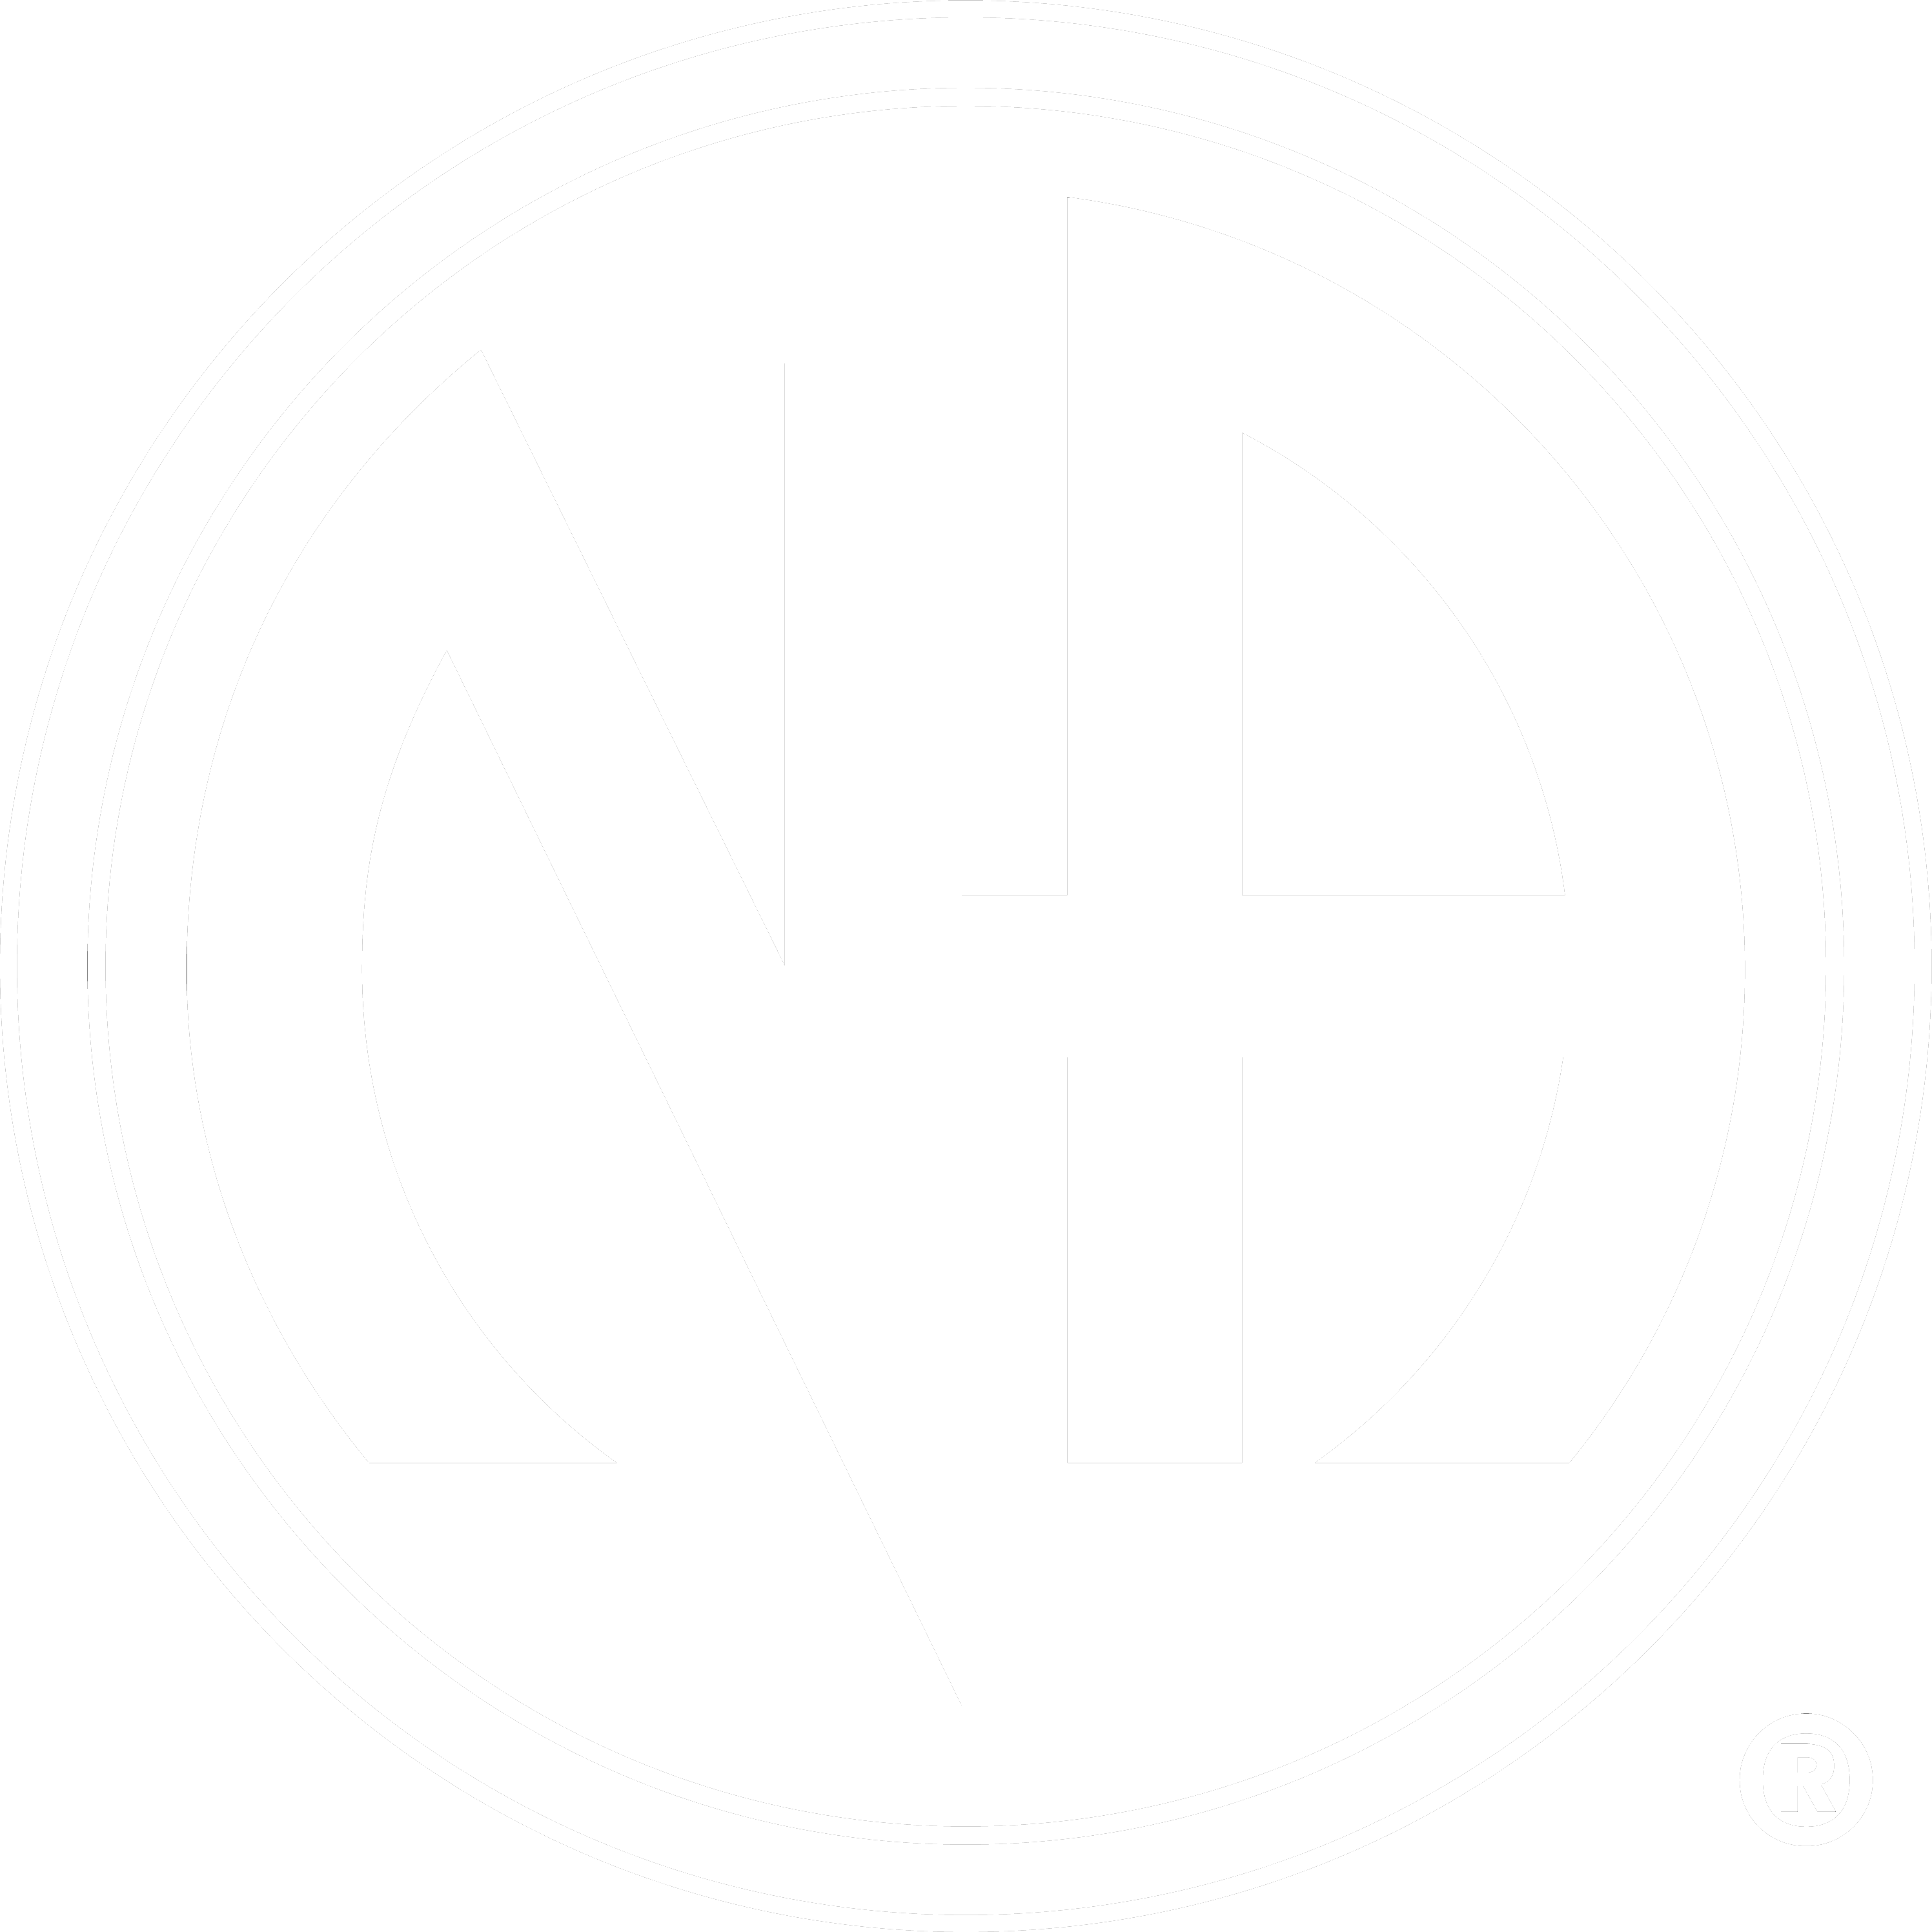 Dayton Area Service Committee Narcotics Anonymous